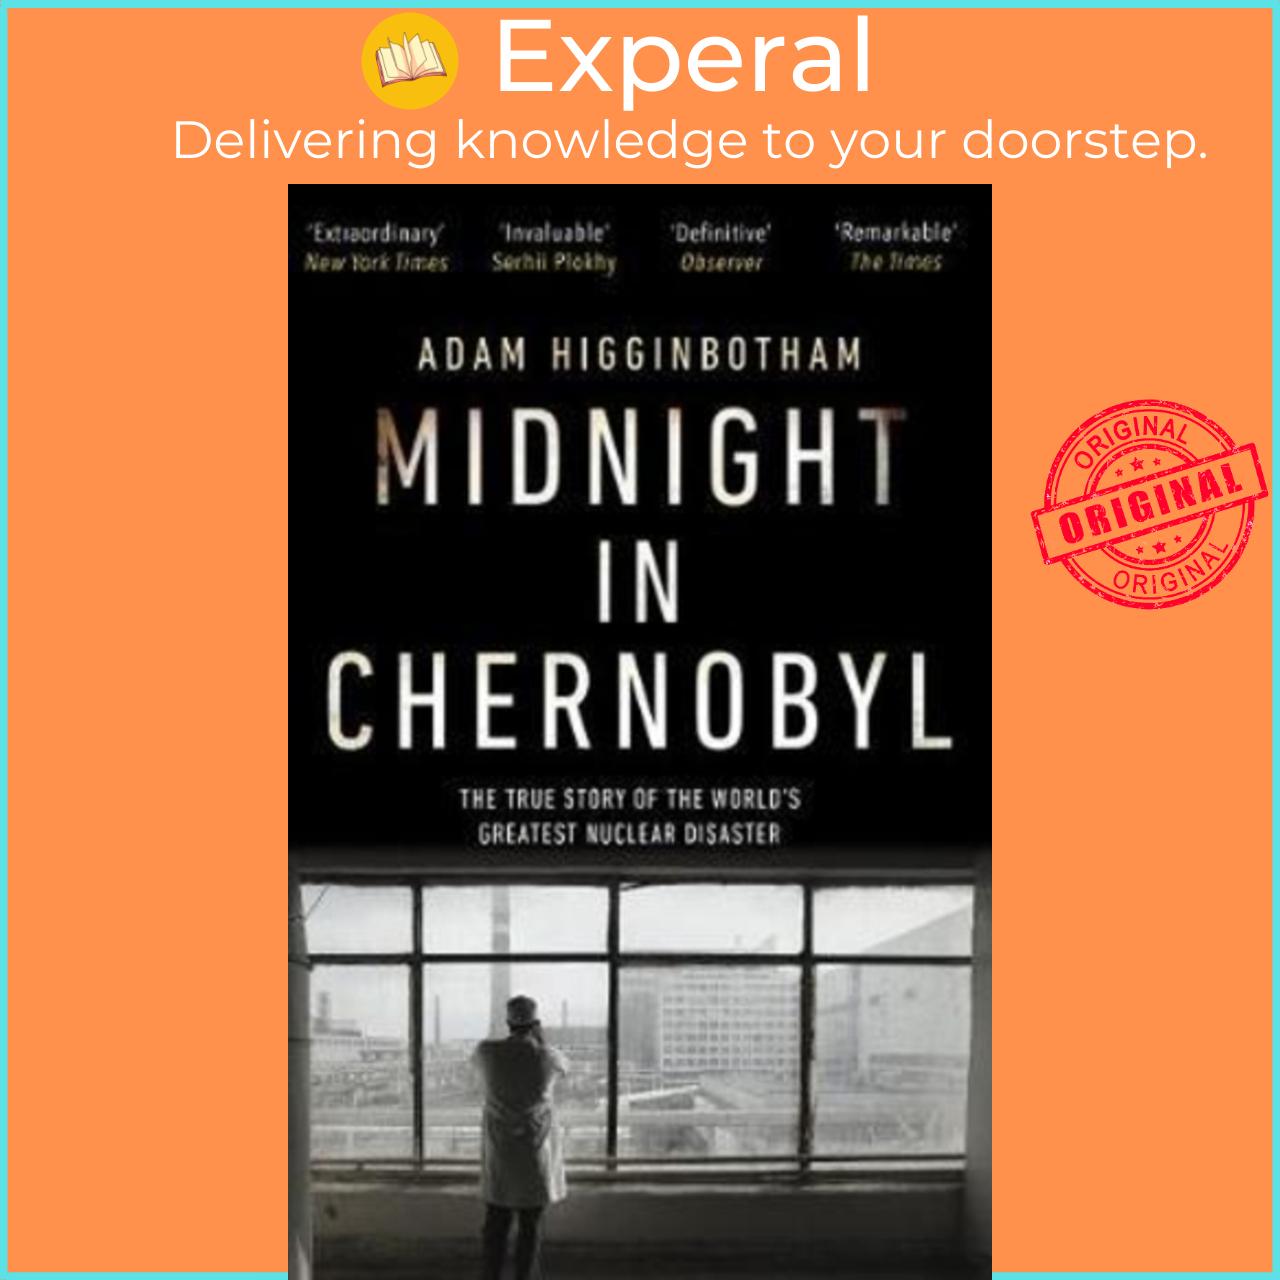 Sách - Midnight in Chernobyl : The Untold Story of the World's Greatest Nuc by Adam Higginbotham (UK edition, paperback)